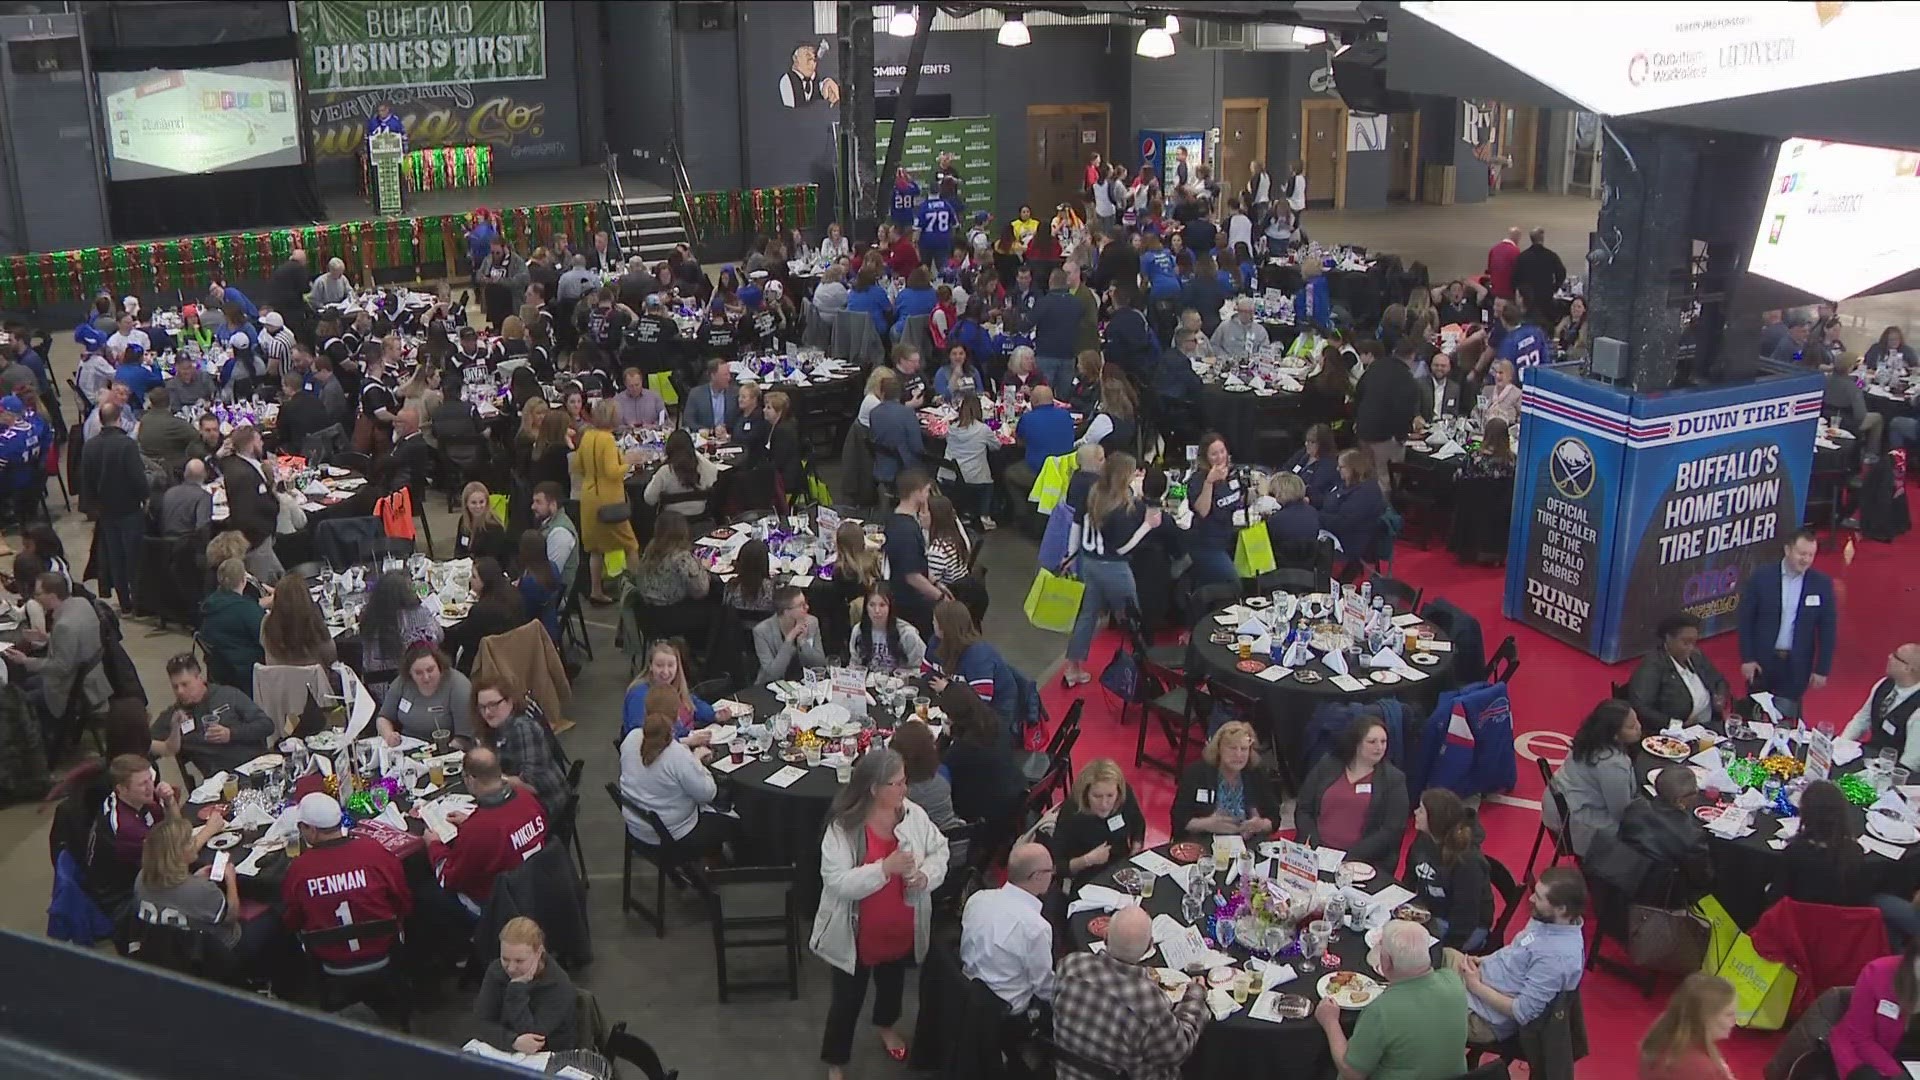 80 companies attended the Buffalo Business First event.